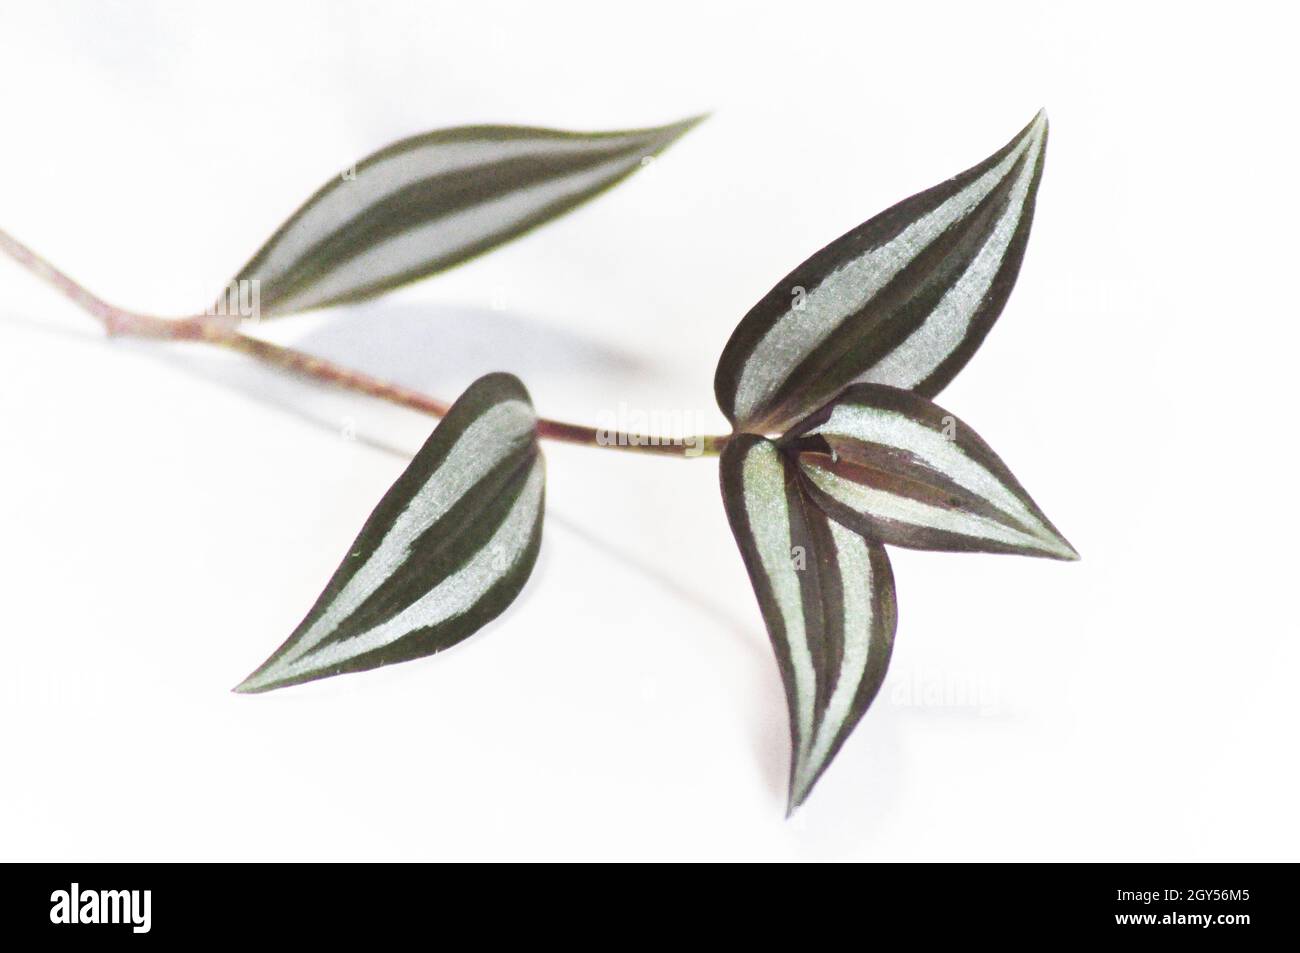 Tradescantia zebrina plant - a stem of the plant showing 5 leaves and set against a white background Stock Photo